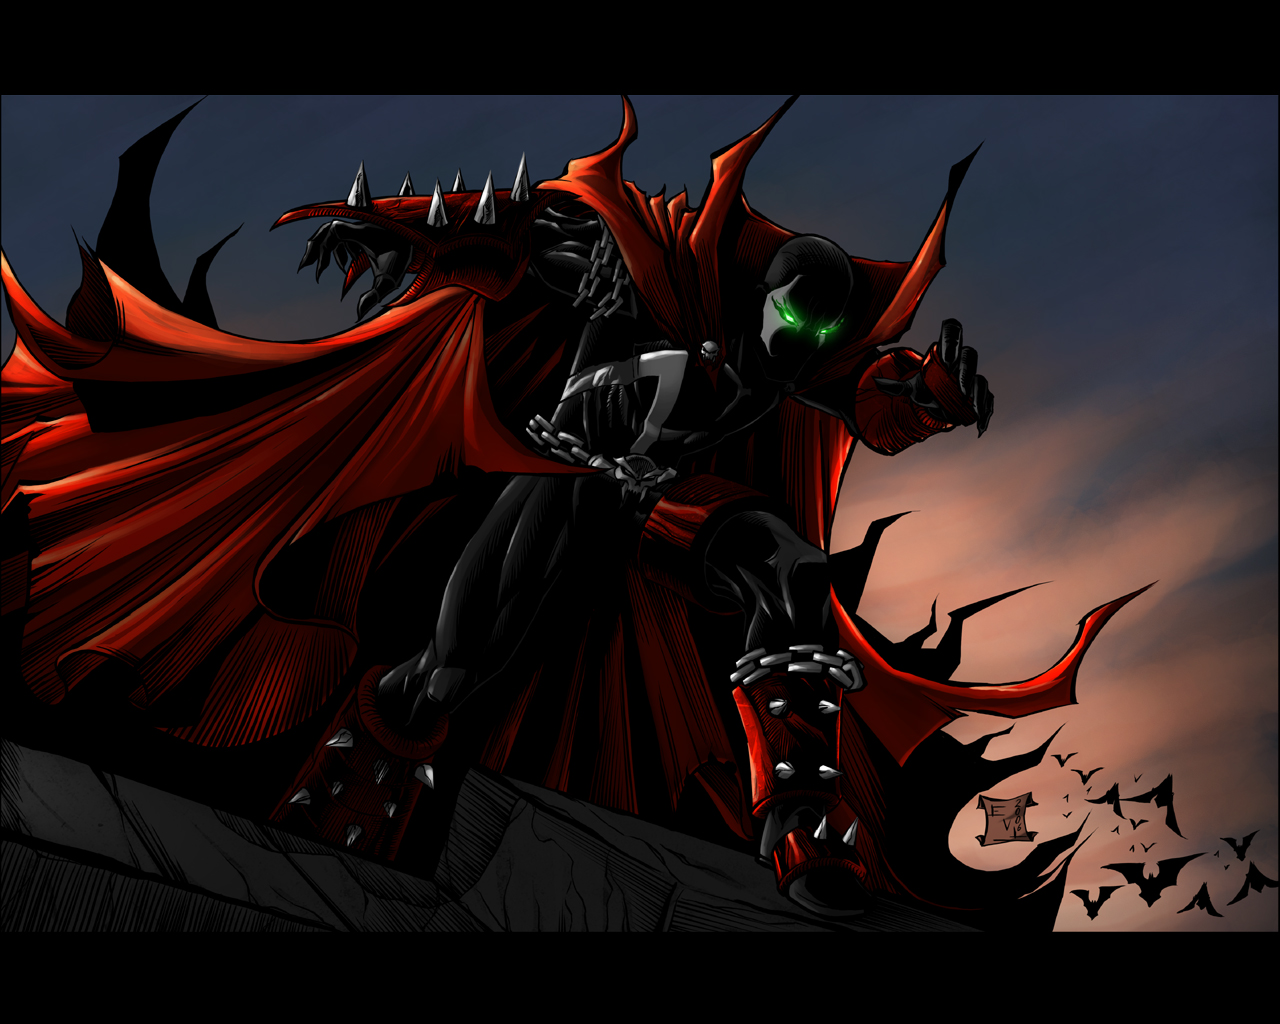 Popular Spawn Image for Phone